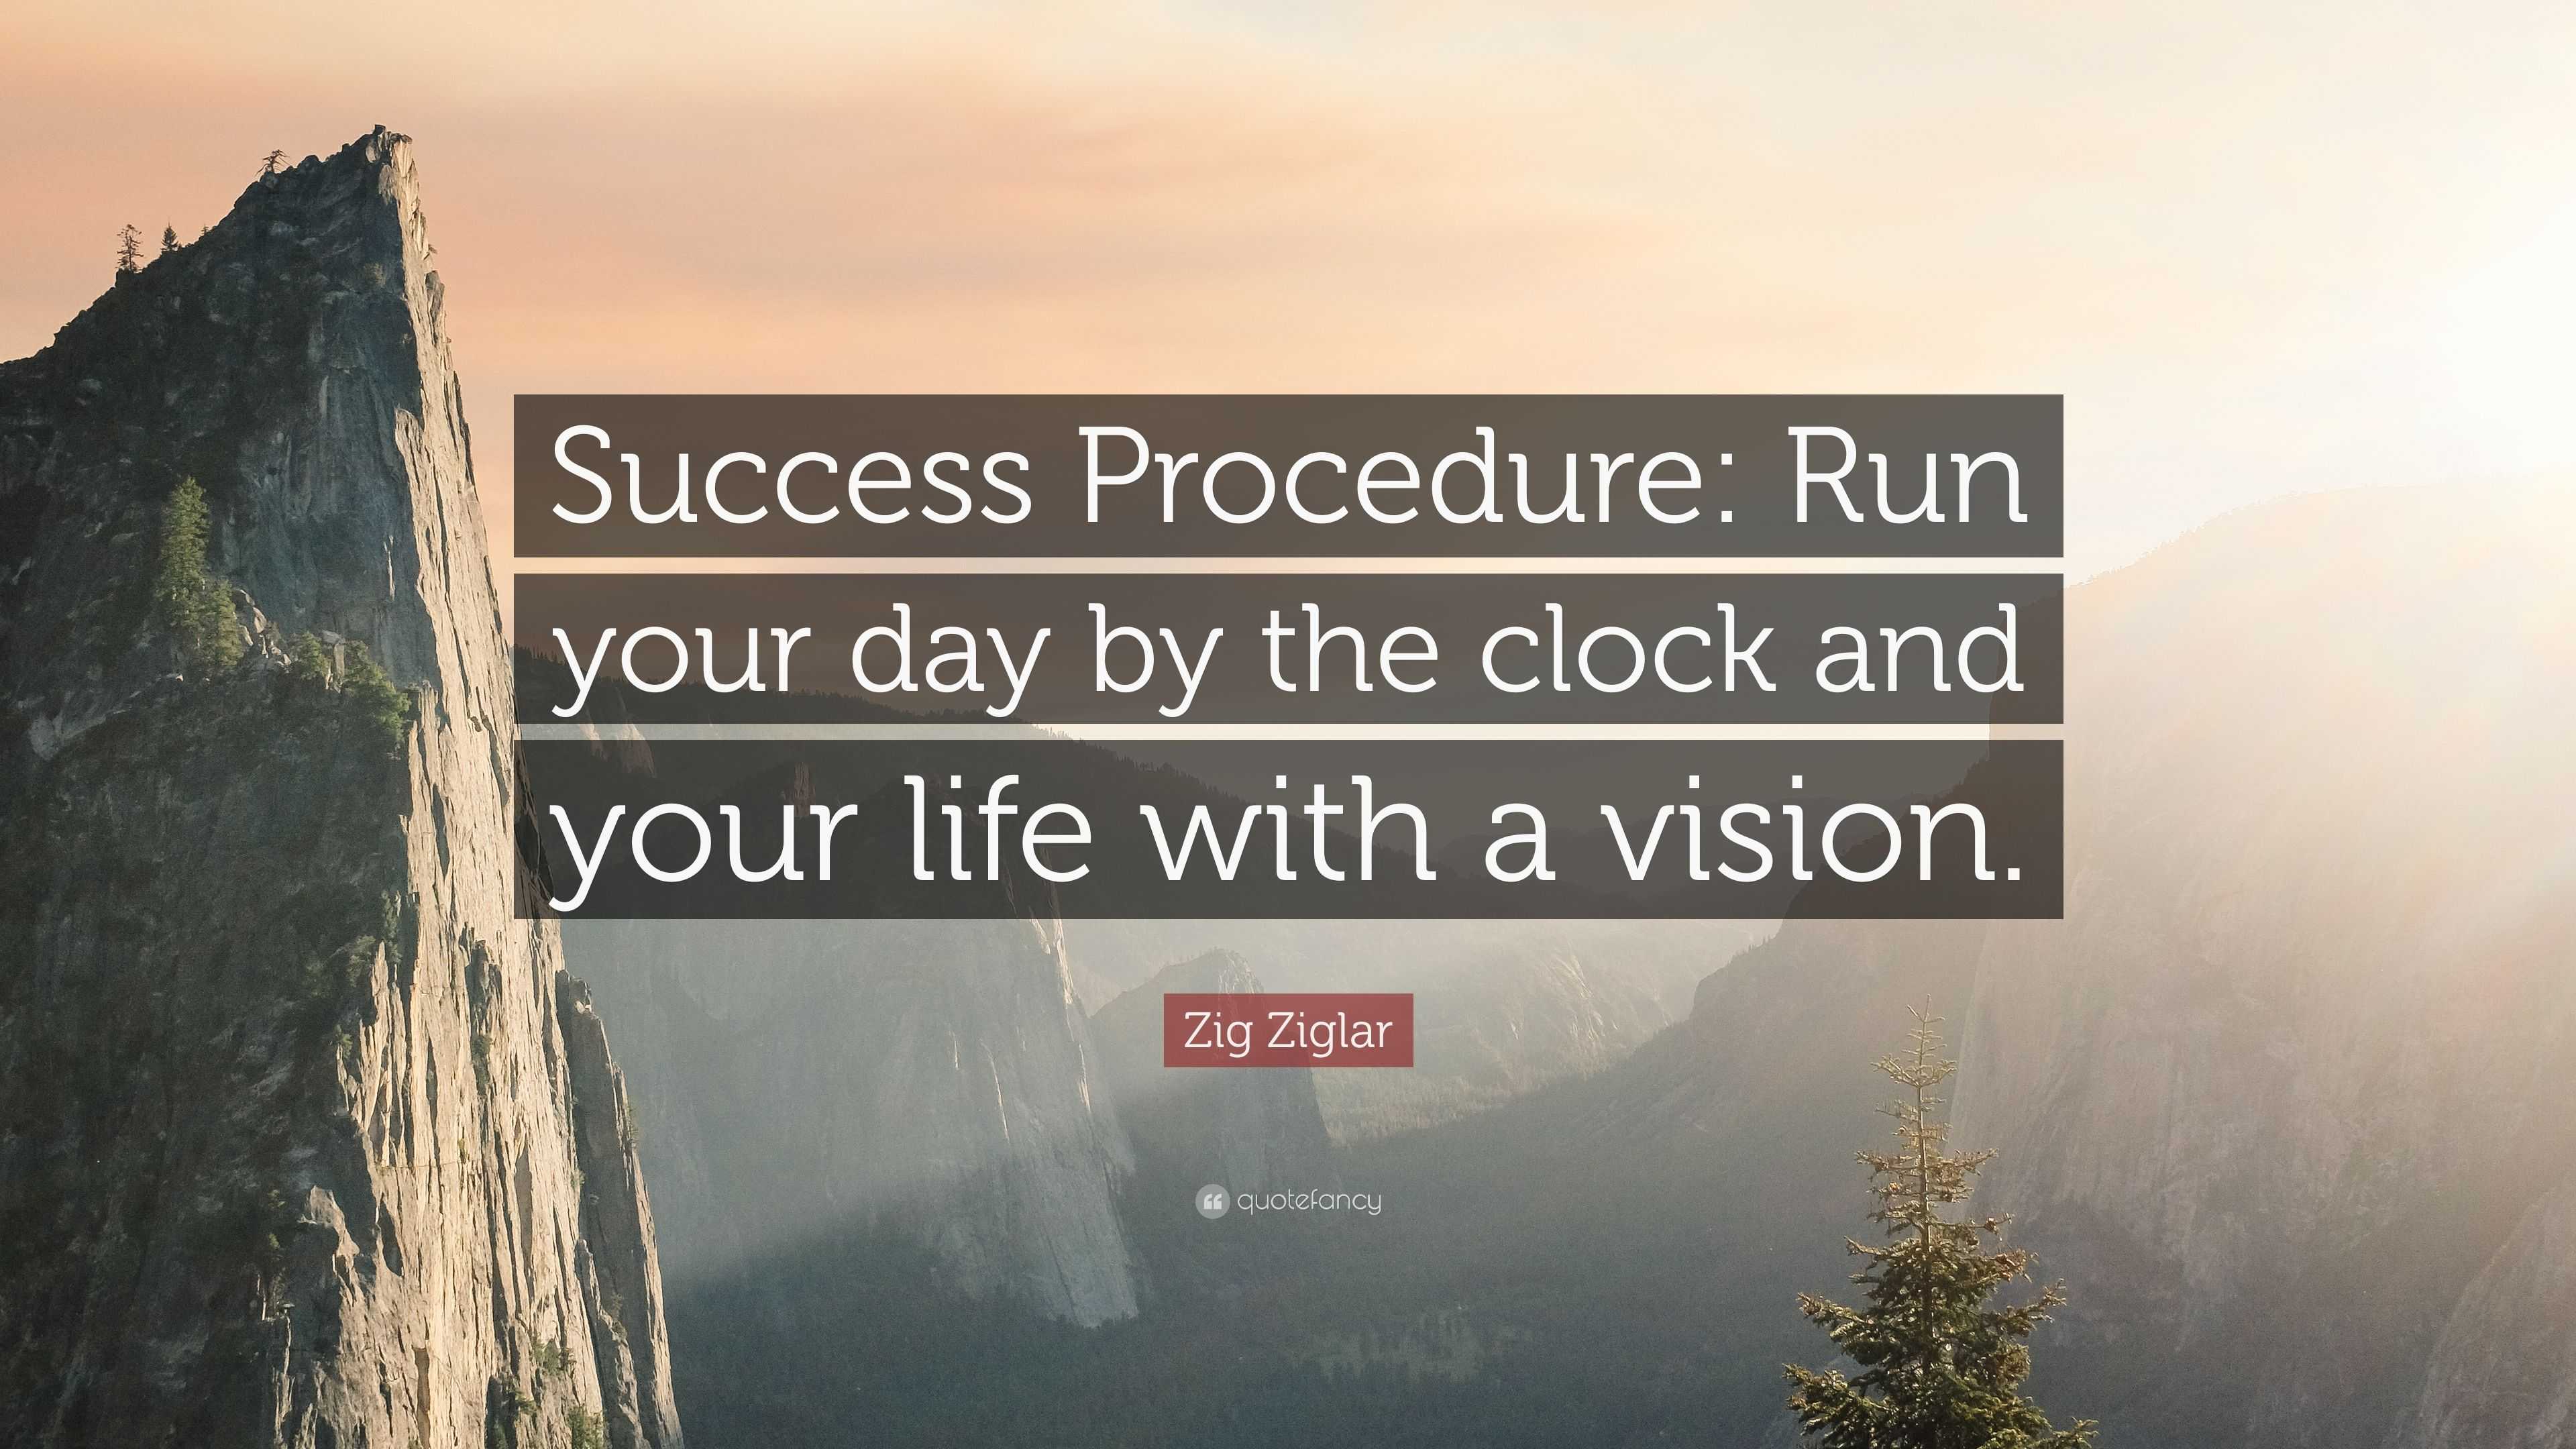 Zig Ziglar Quote “Success Procedure Run your day by the clock and your